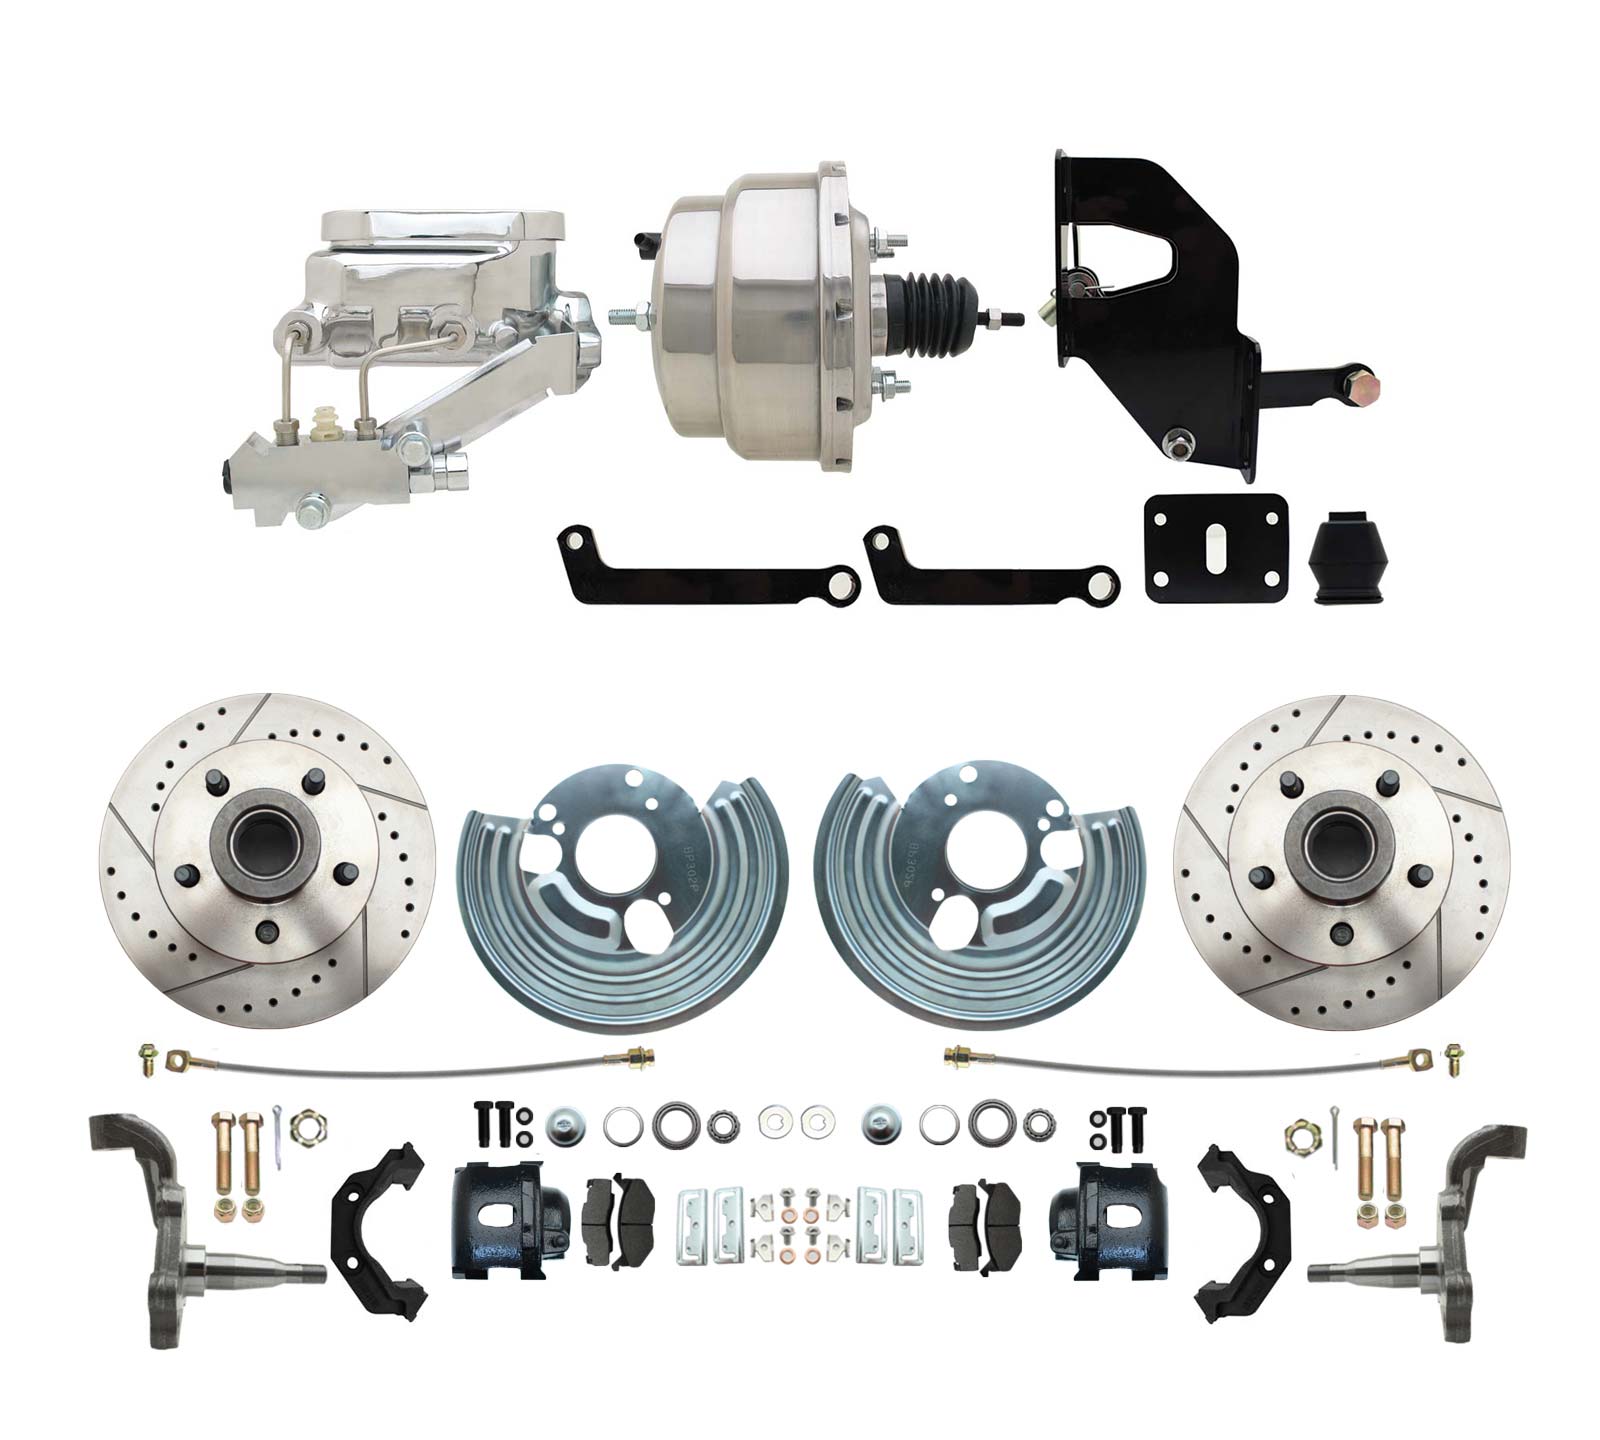 1962-72 Mopar B&E Body  Front  Disc Brake Conversion Kit W/ Drilled & Slotted Rotors & Powder Coated Black Calipers ( Charger, Challenger, Coronet) W/ 8 Dual Chrome Booster Conversion Kit W/ Flat Top Chrome Master Cylinder & Valve